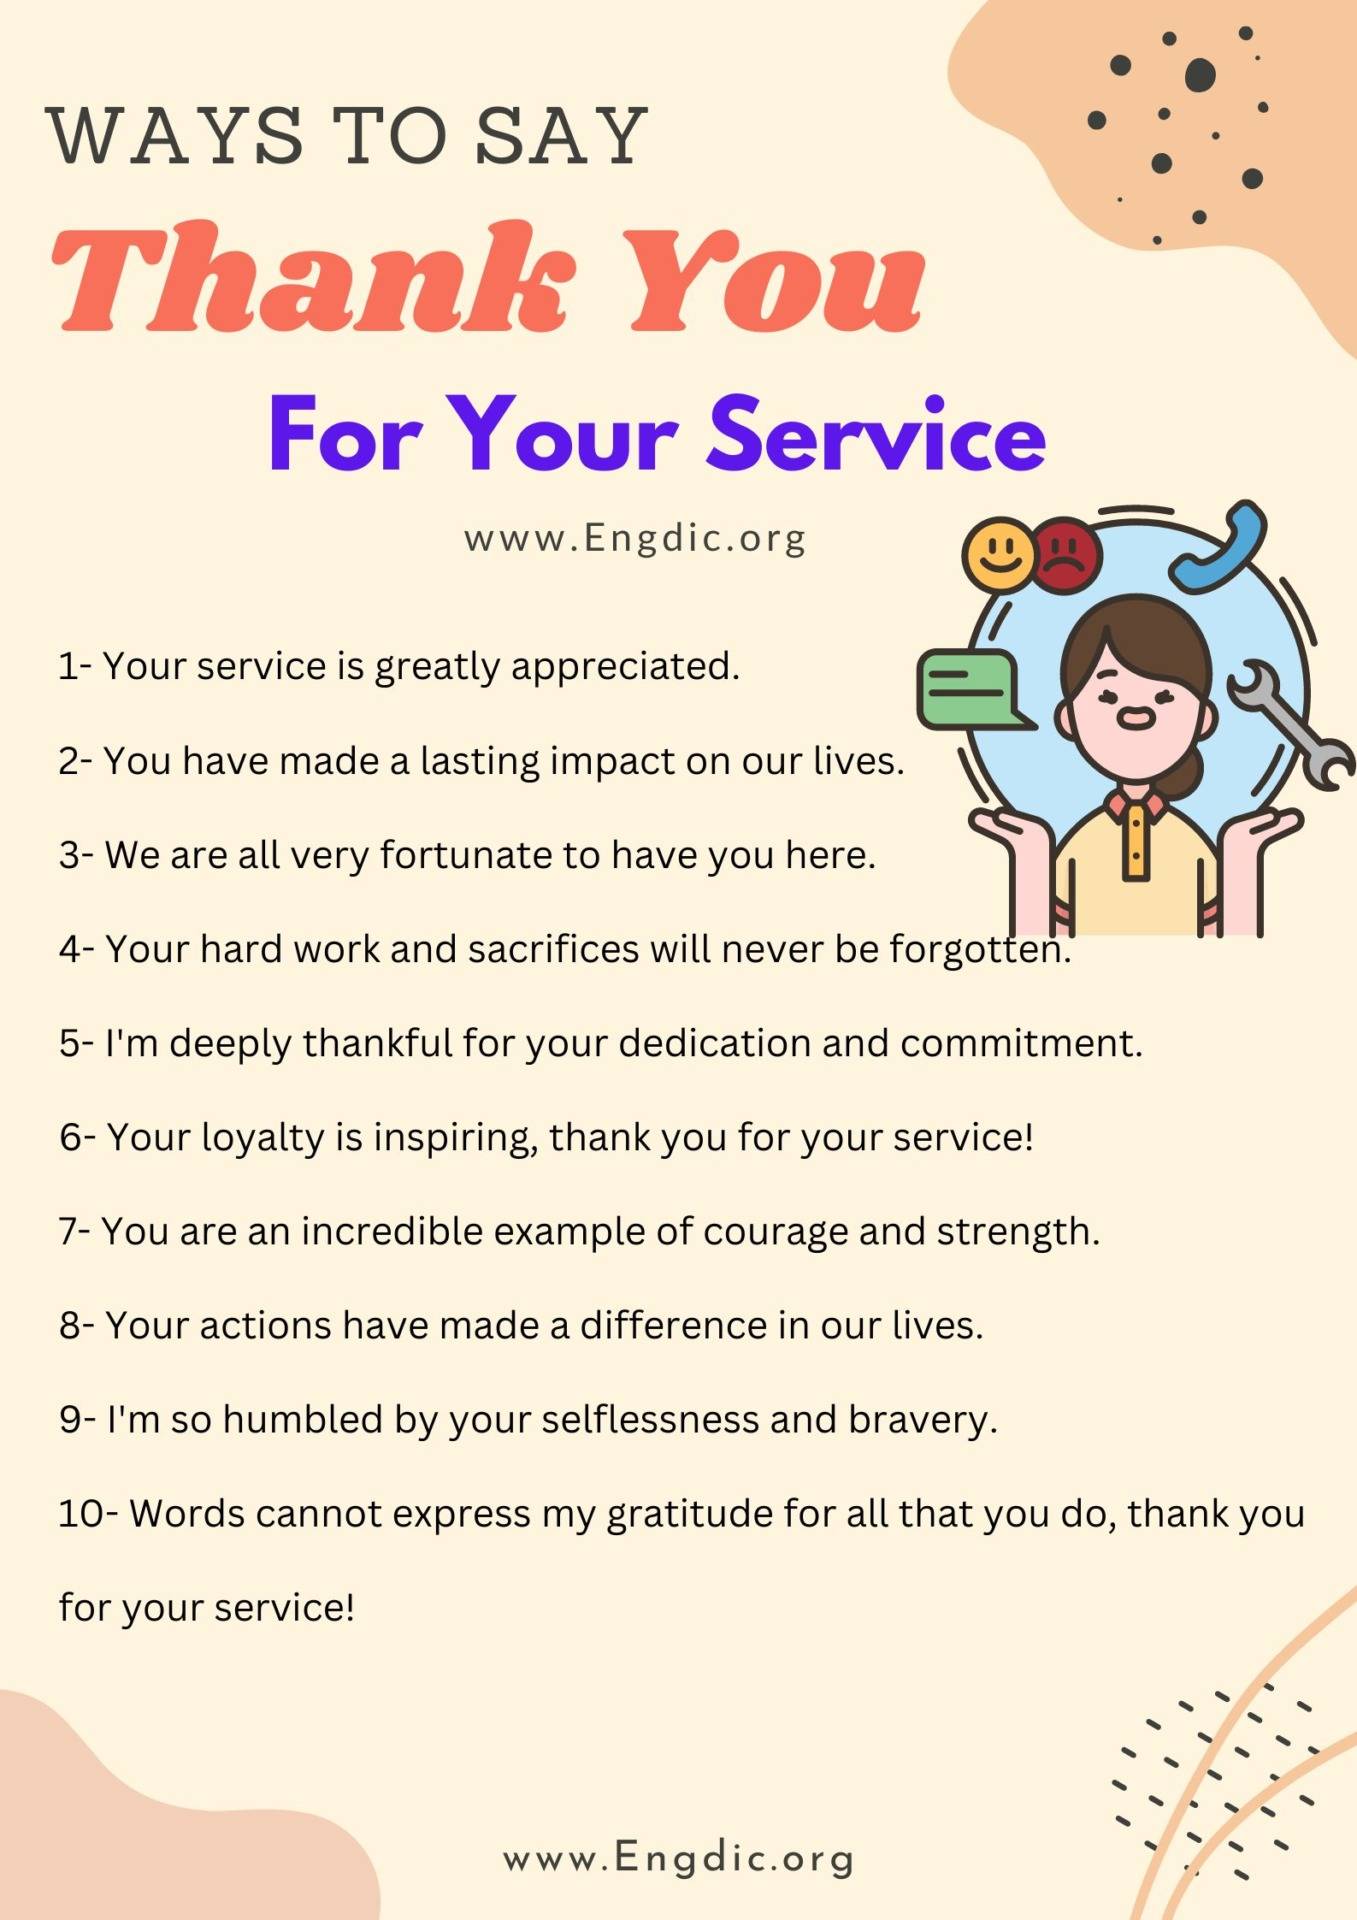 Ways to say thank you For Your Service